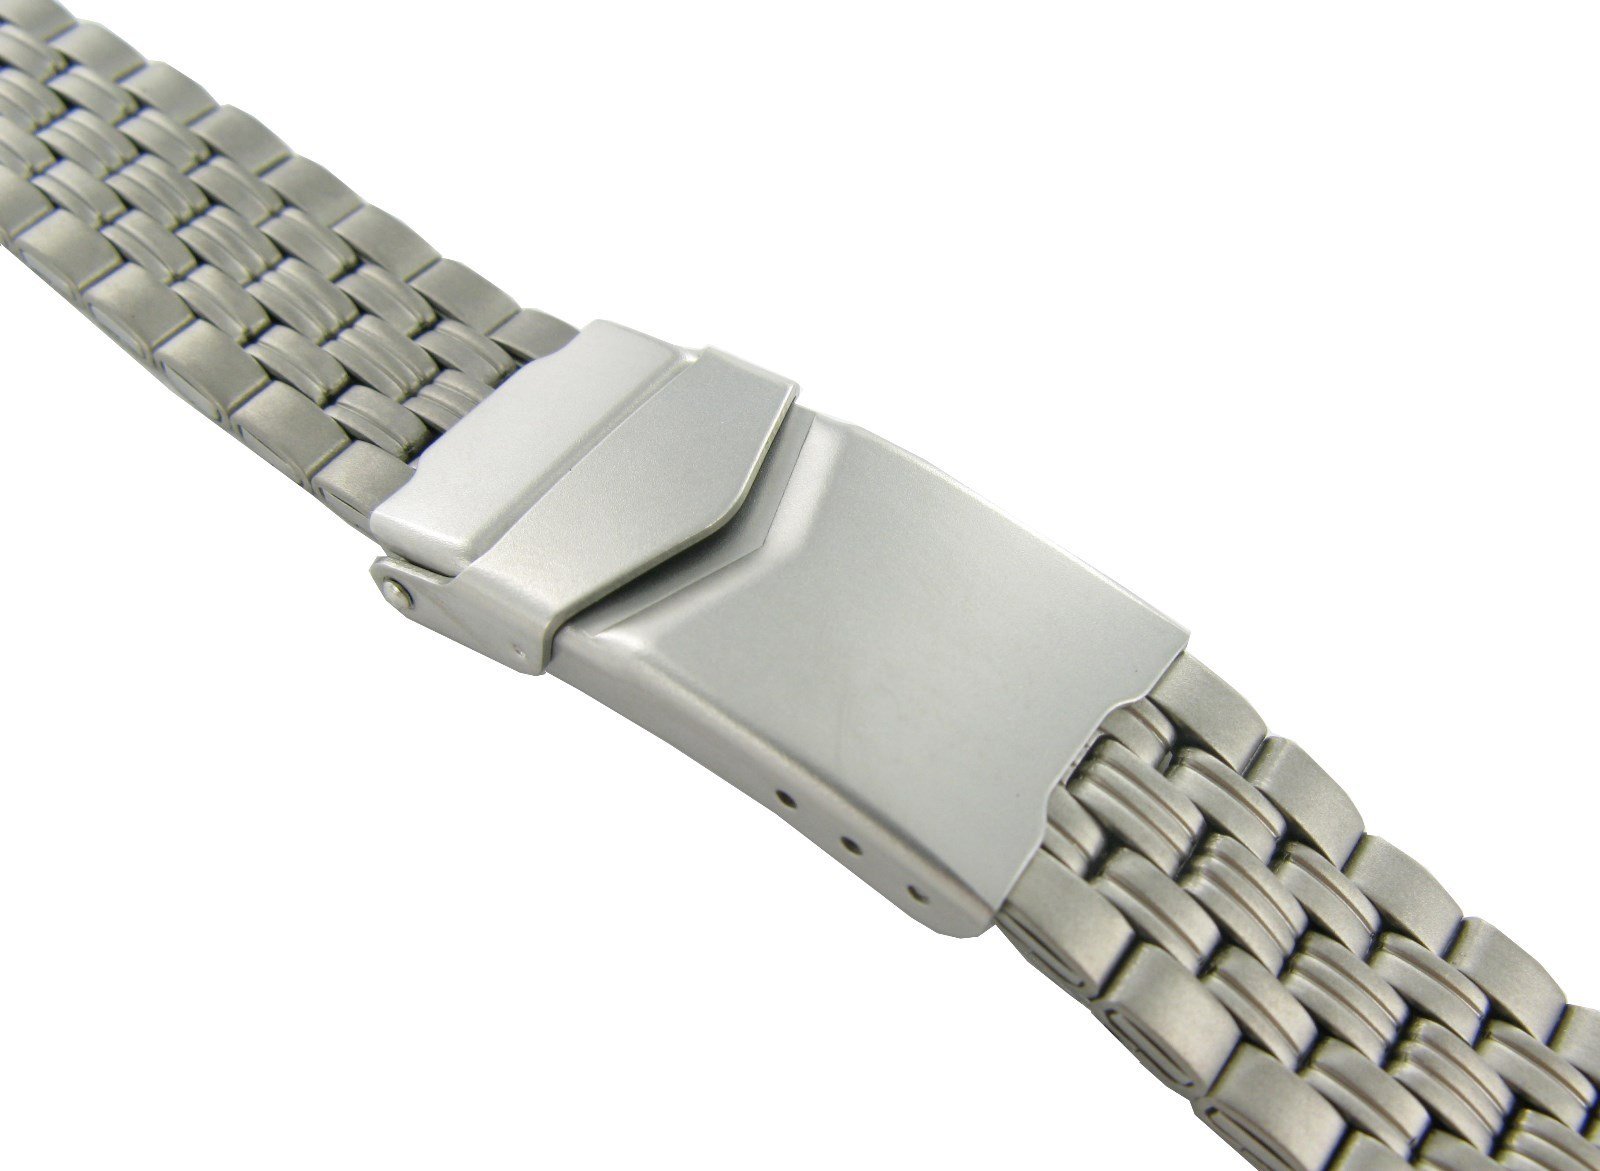 milano 12mm Titanium with Stainless Steel Fold Over Buckle Grey Watch Band